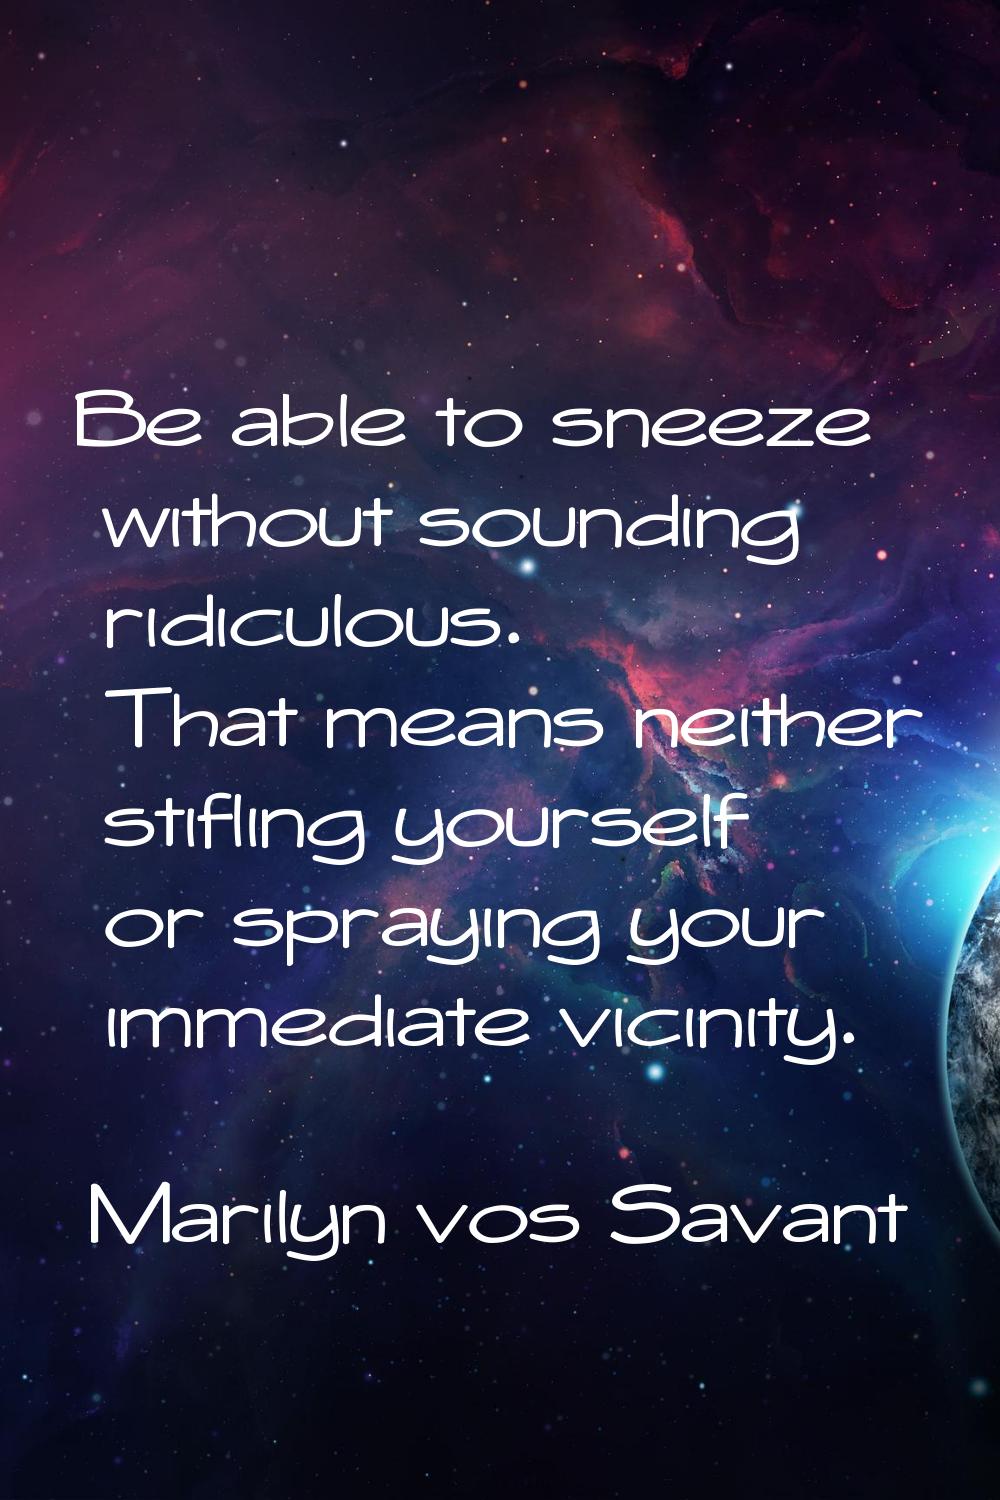 Be able to sneeze without sounding ridiculous. That means neither stifling yourself or spraying you